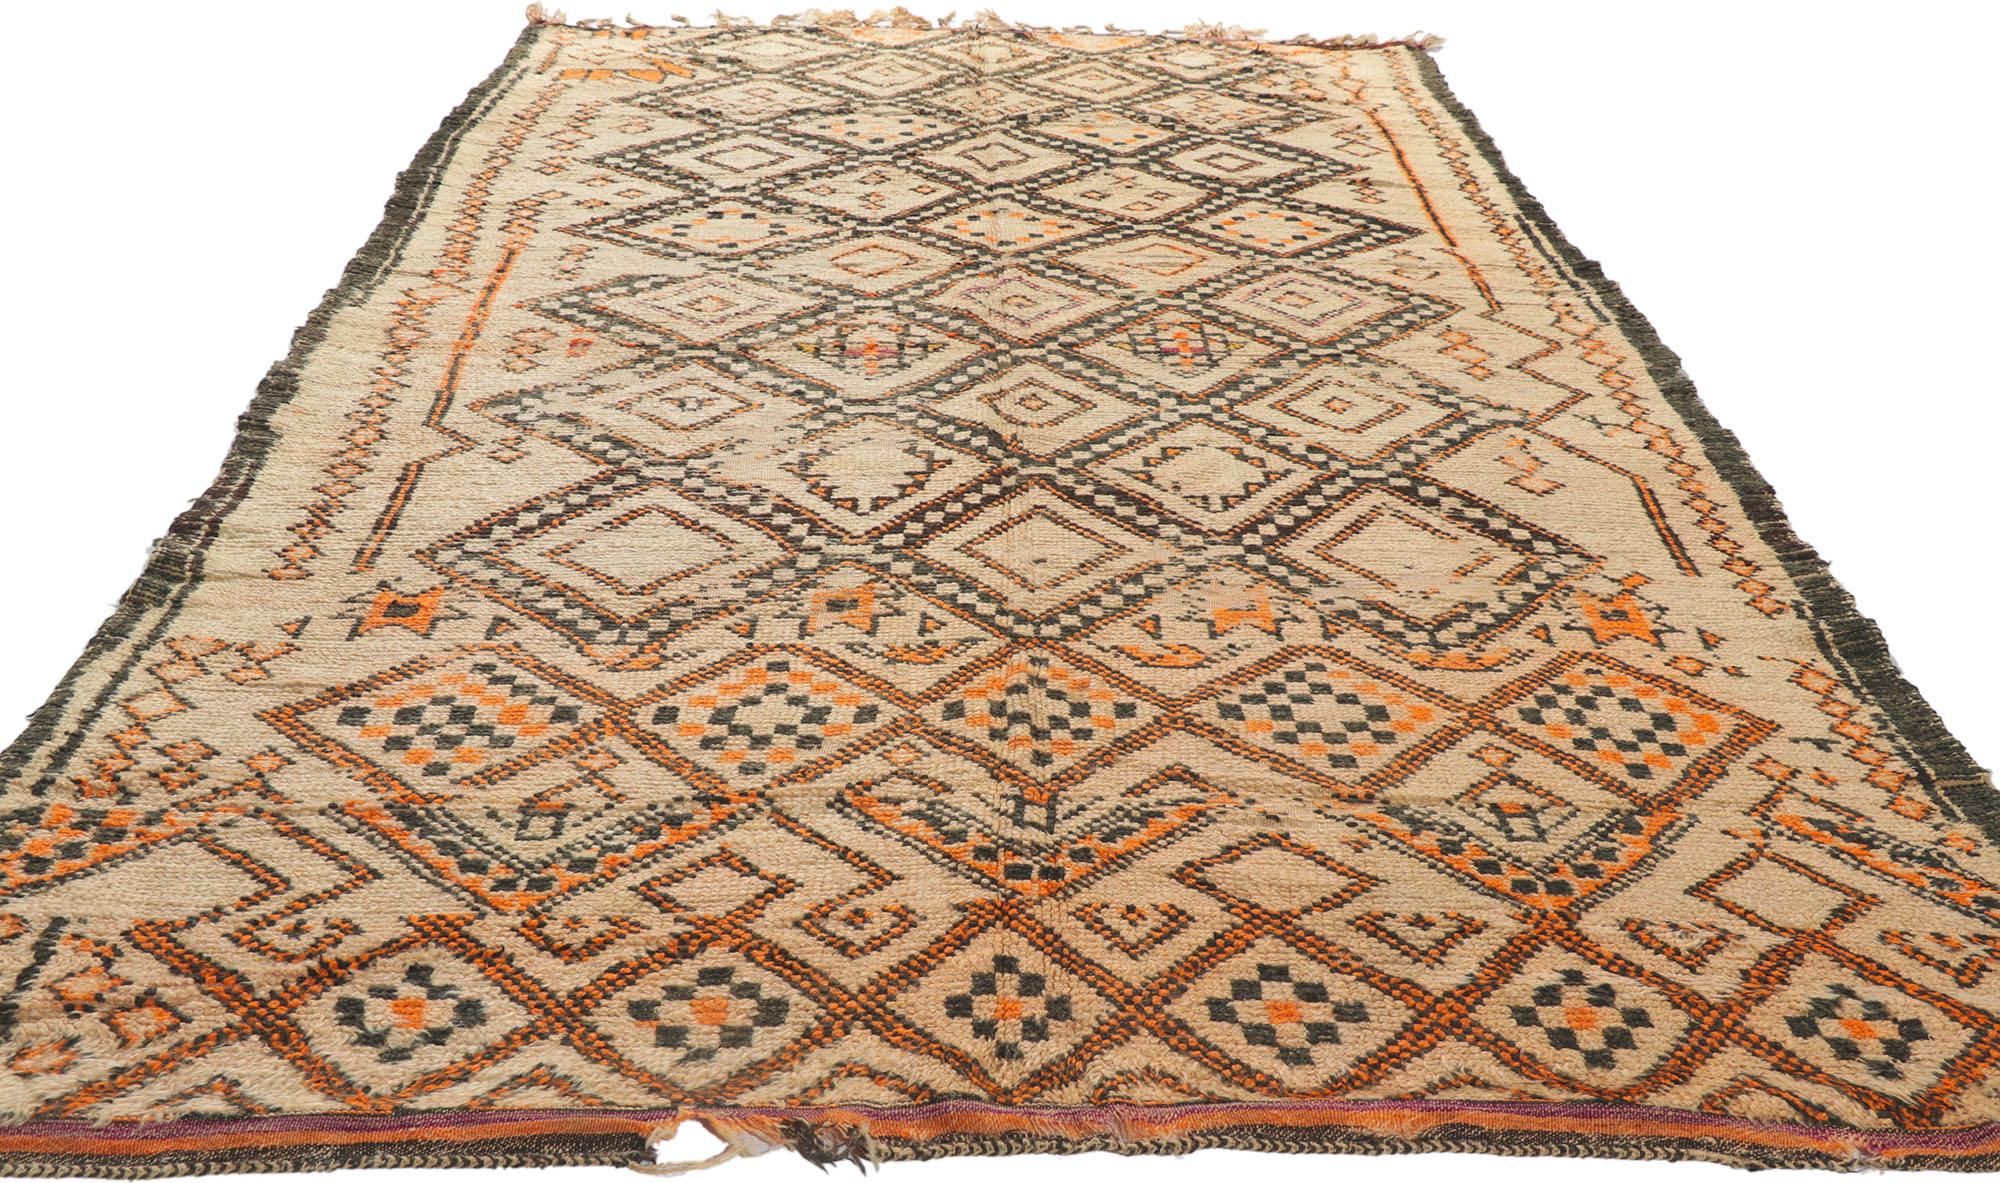 Hand-Knotted Vintage Moroccan Beni Ourain Rug, Rustic Sensibility Meets Nomadic Charm For Sale